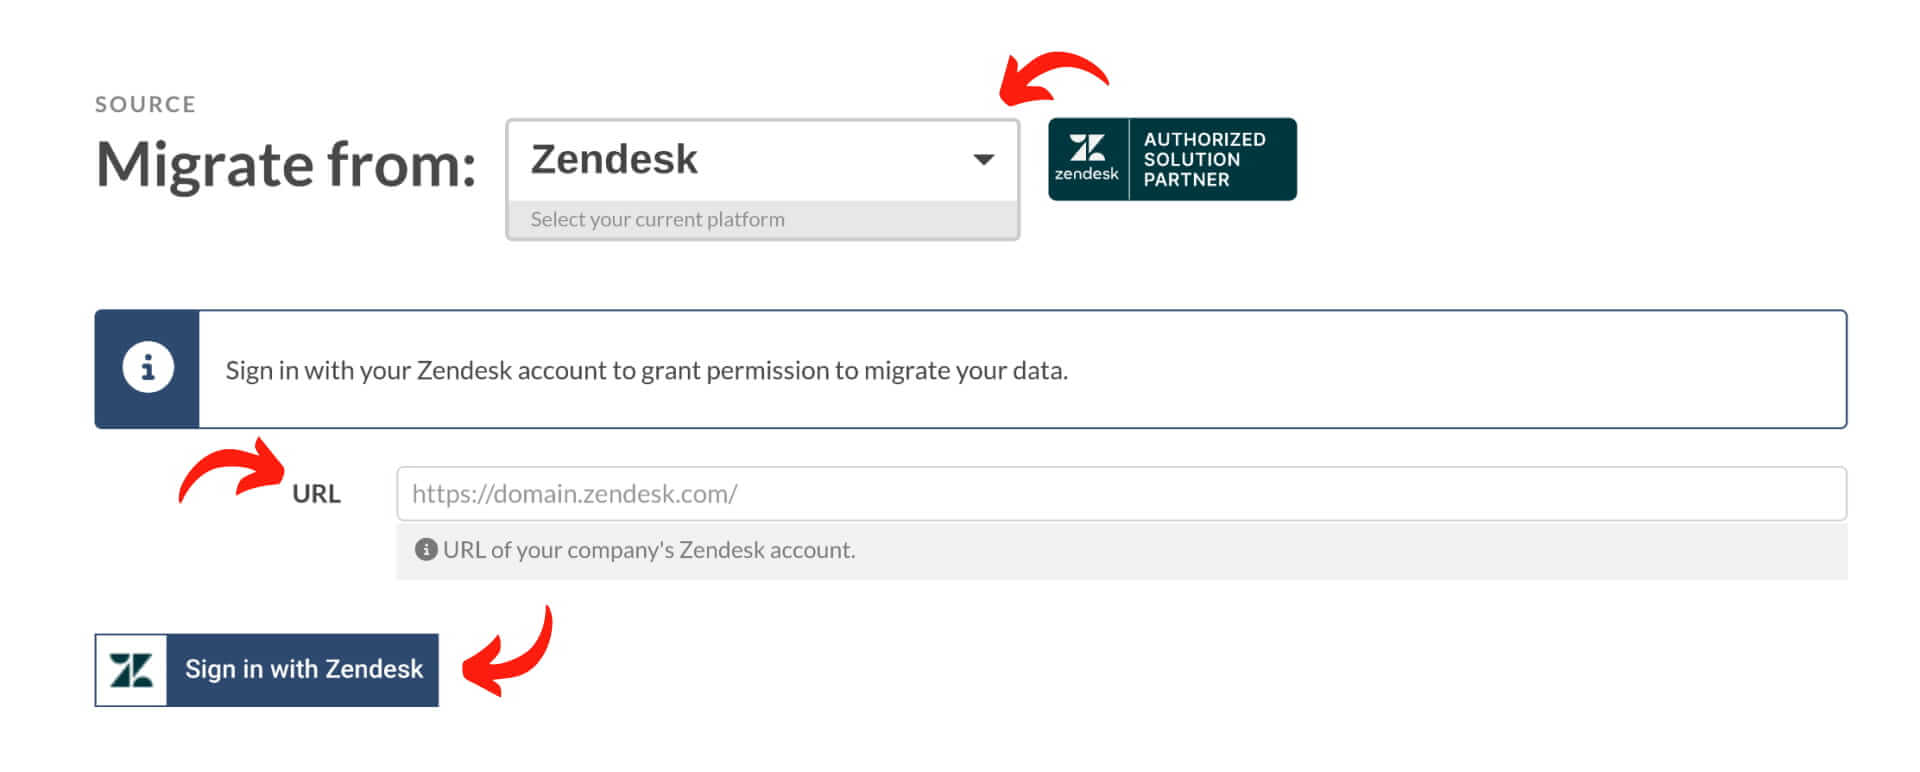 Sign in with Zendesk - Source Step